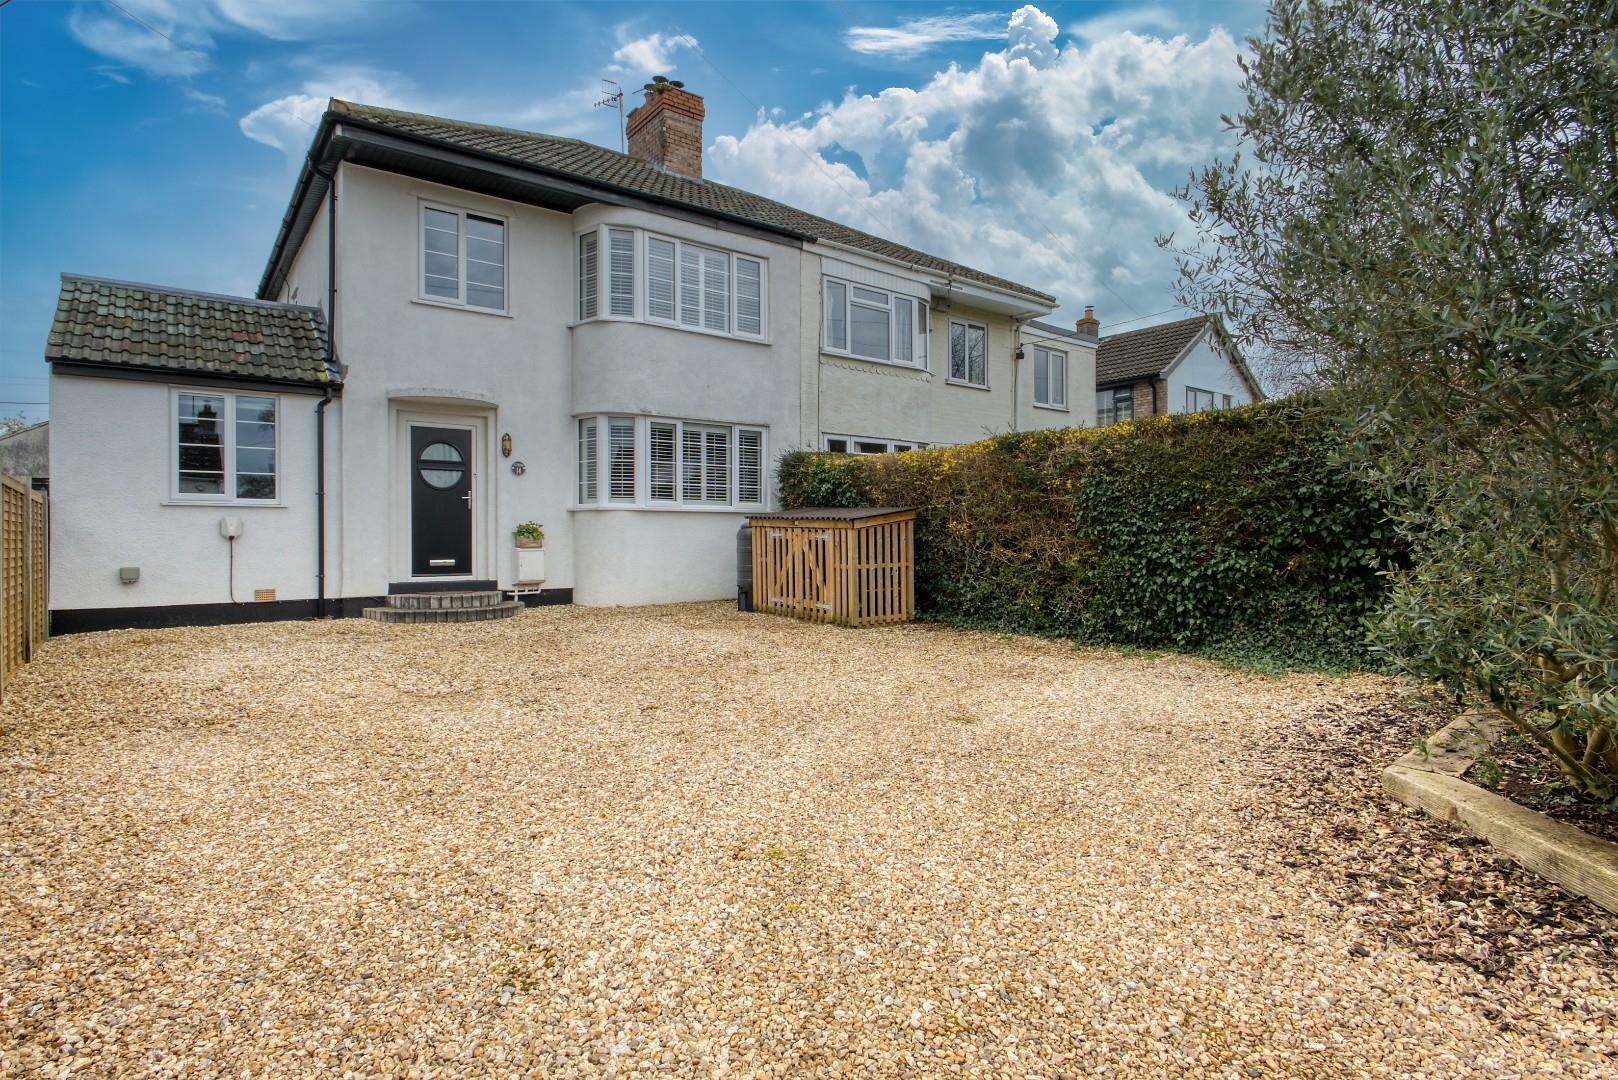 Exceptional extended family home in the village of Cleeve